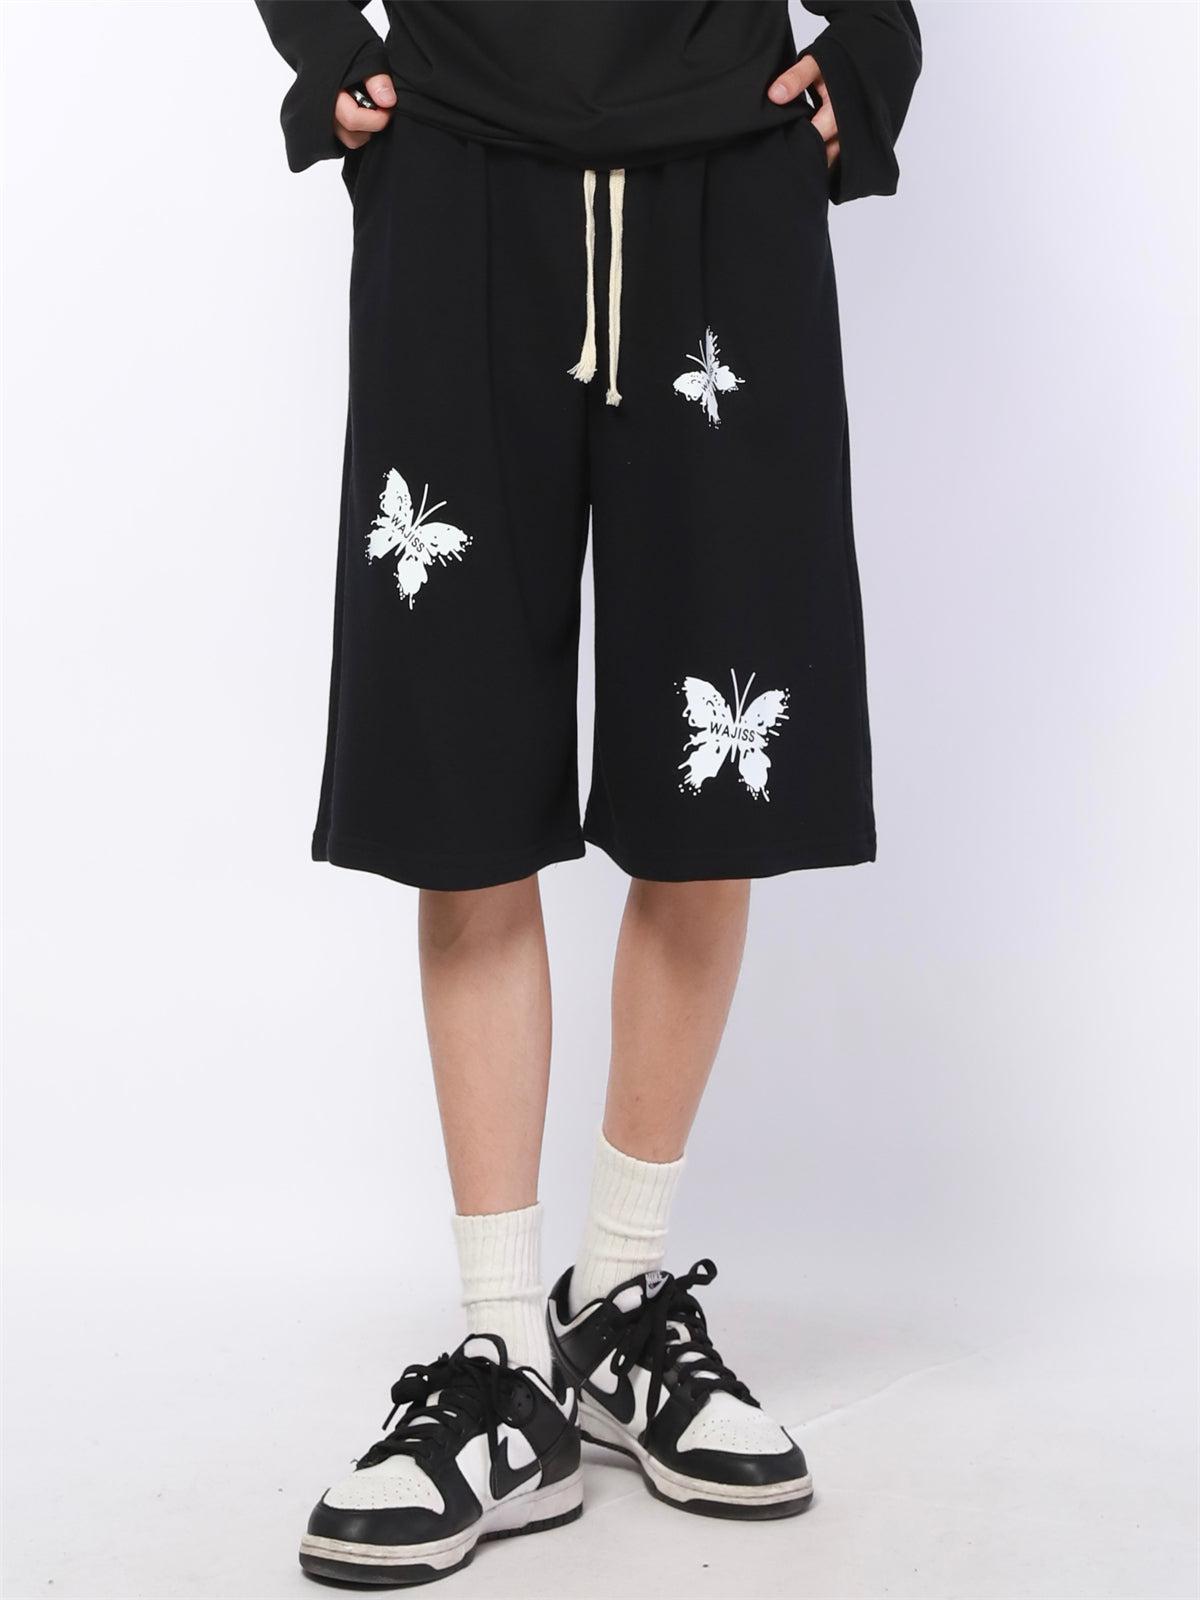 Butterfly Graphic Pattern Shorts Korean Street Fashion Shorts By Made Extreme Shop Online at OH Vault